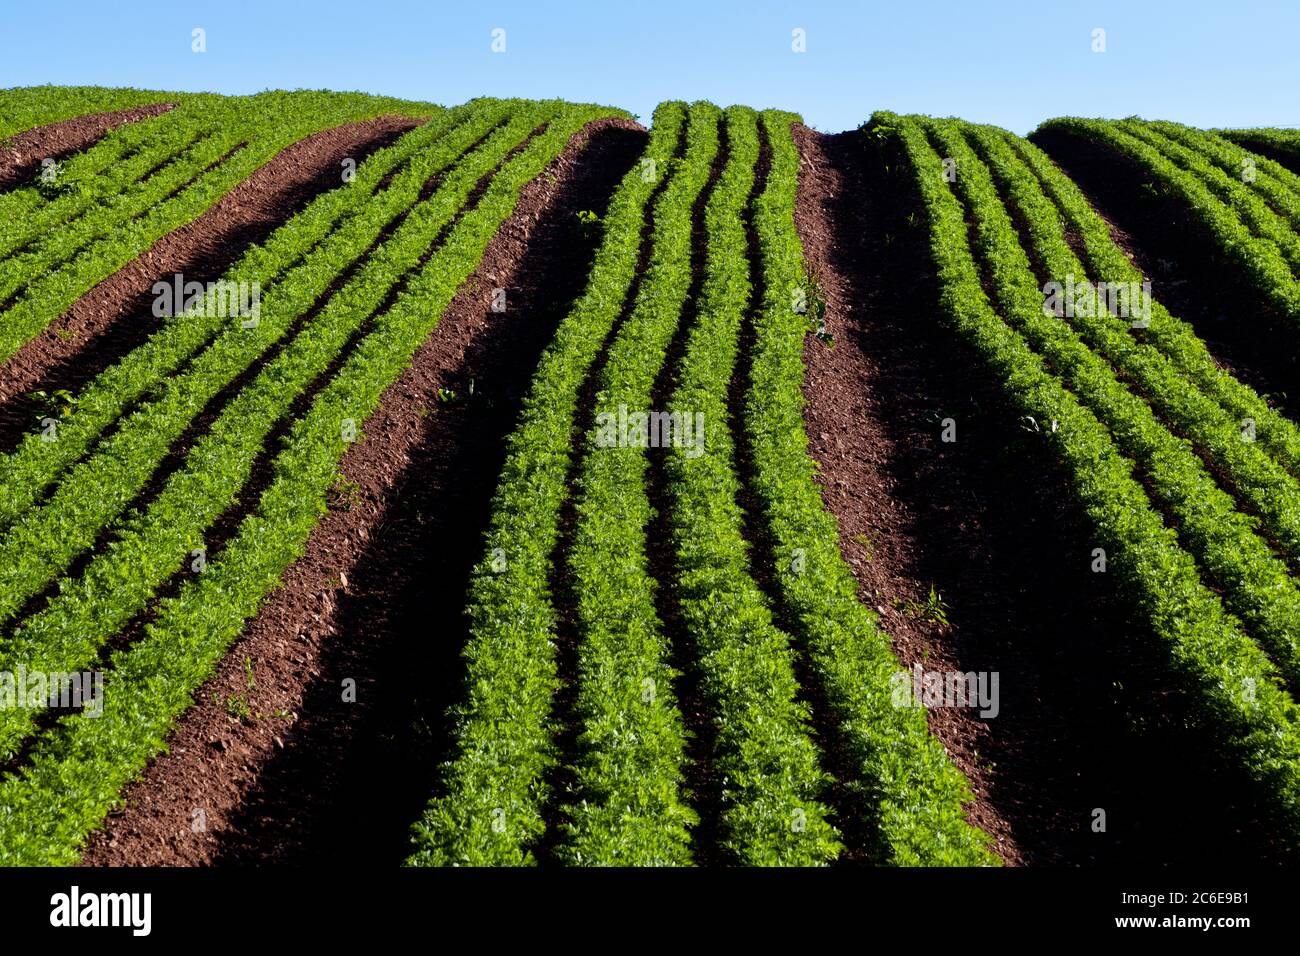 Rows of carrots growing in a field Stock Photo